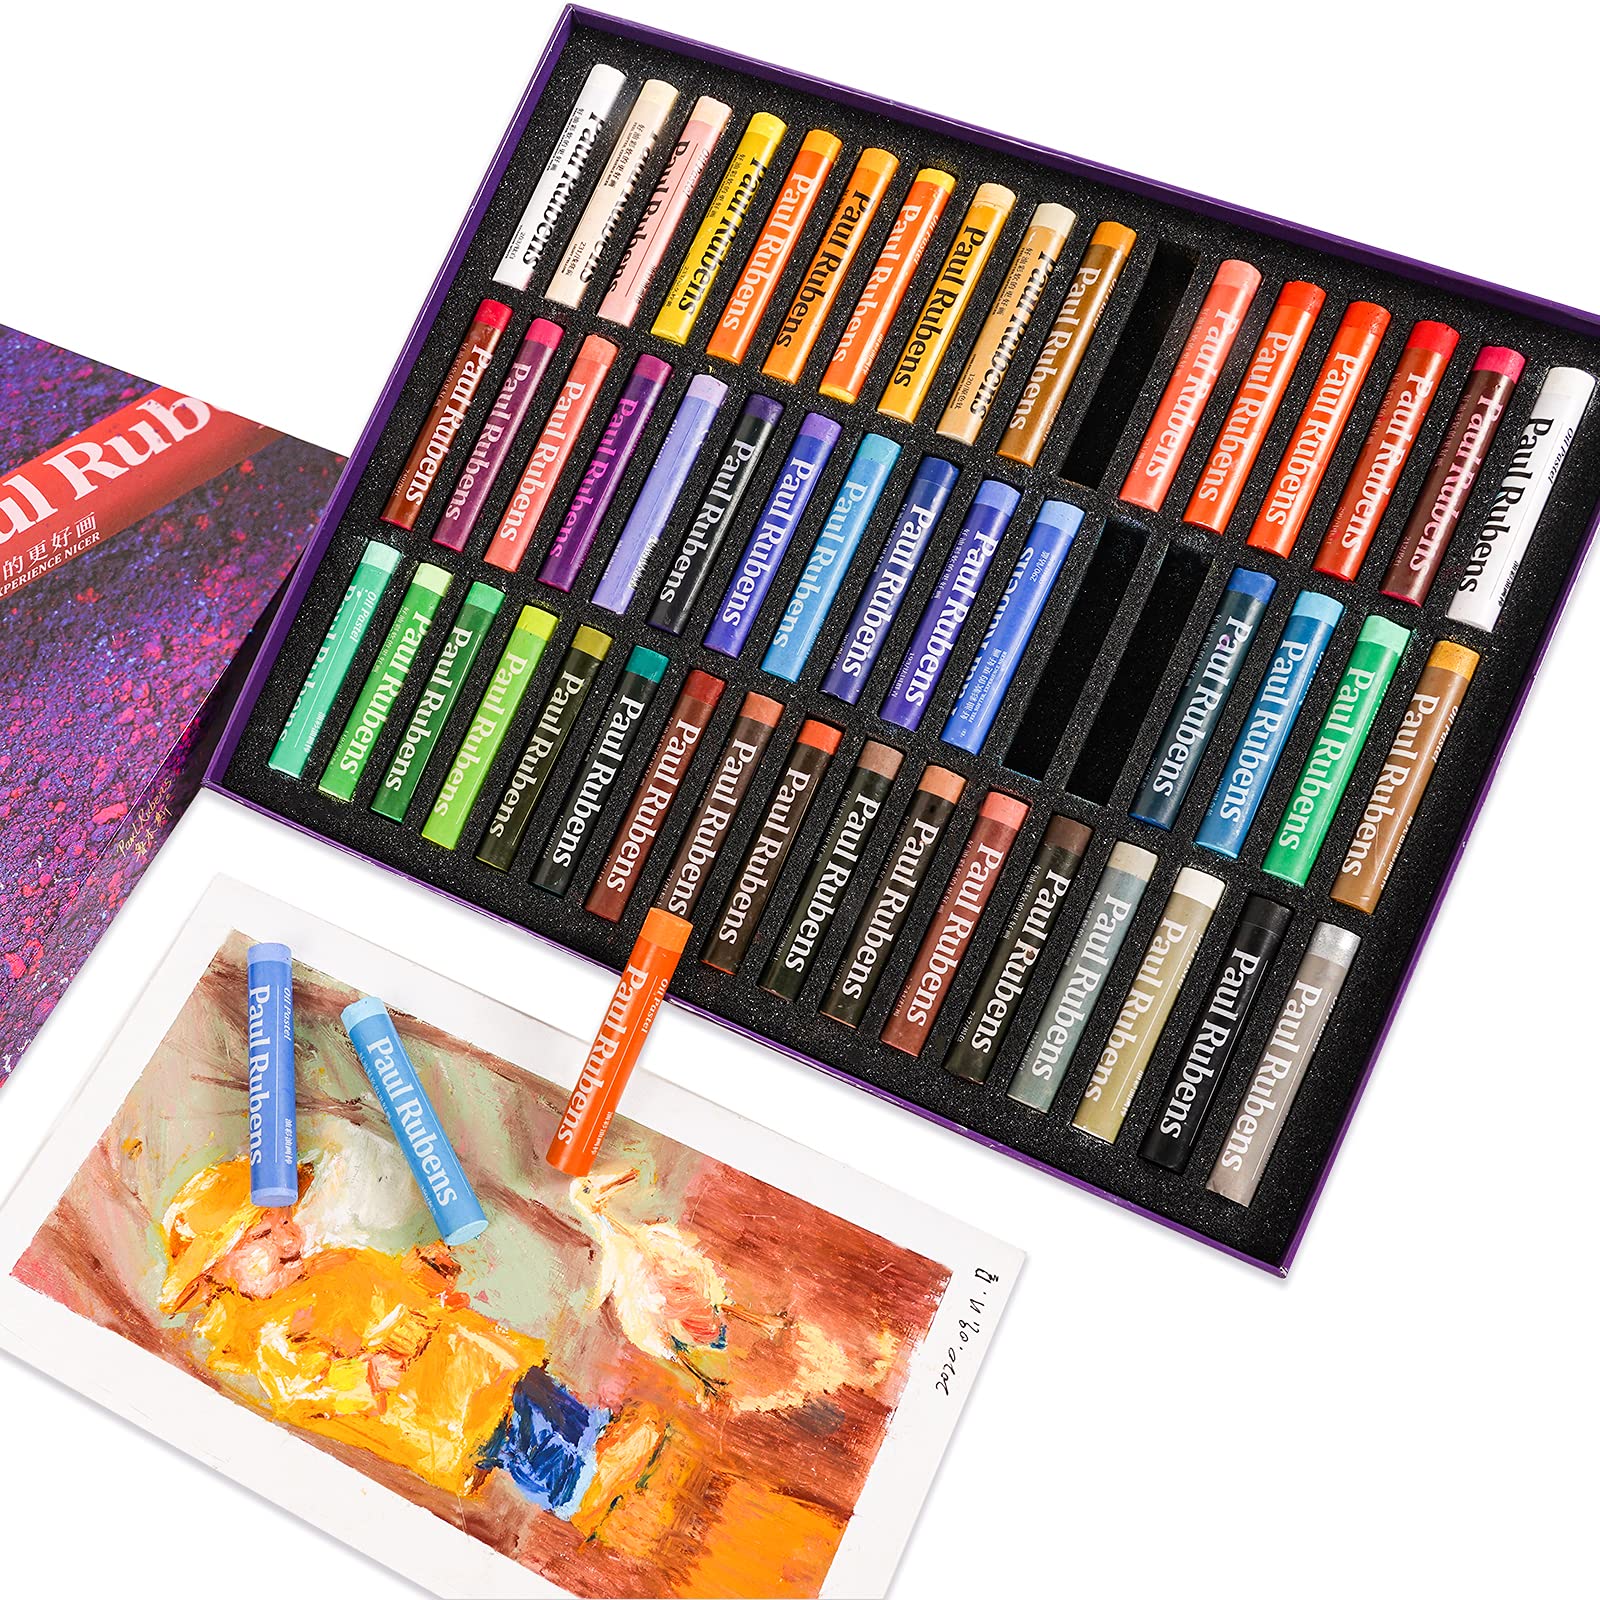 EXTRIC Oil Pastels 25 Colors Count Soft Pastels, Oil Pastels for Kids and  Artists, Oil Crayons